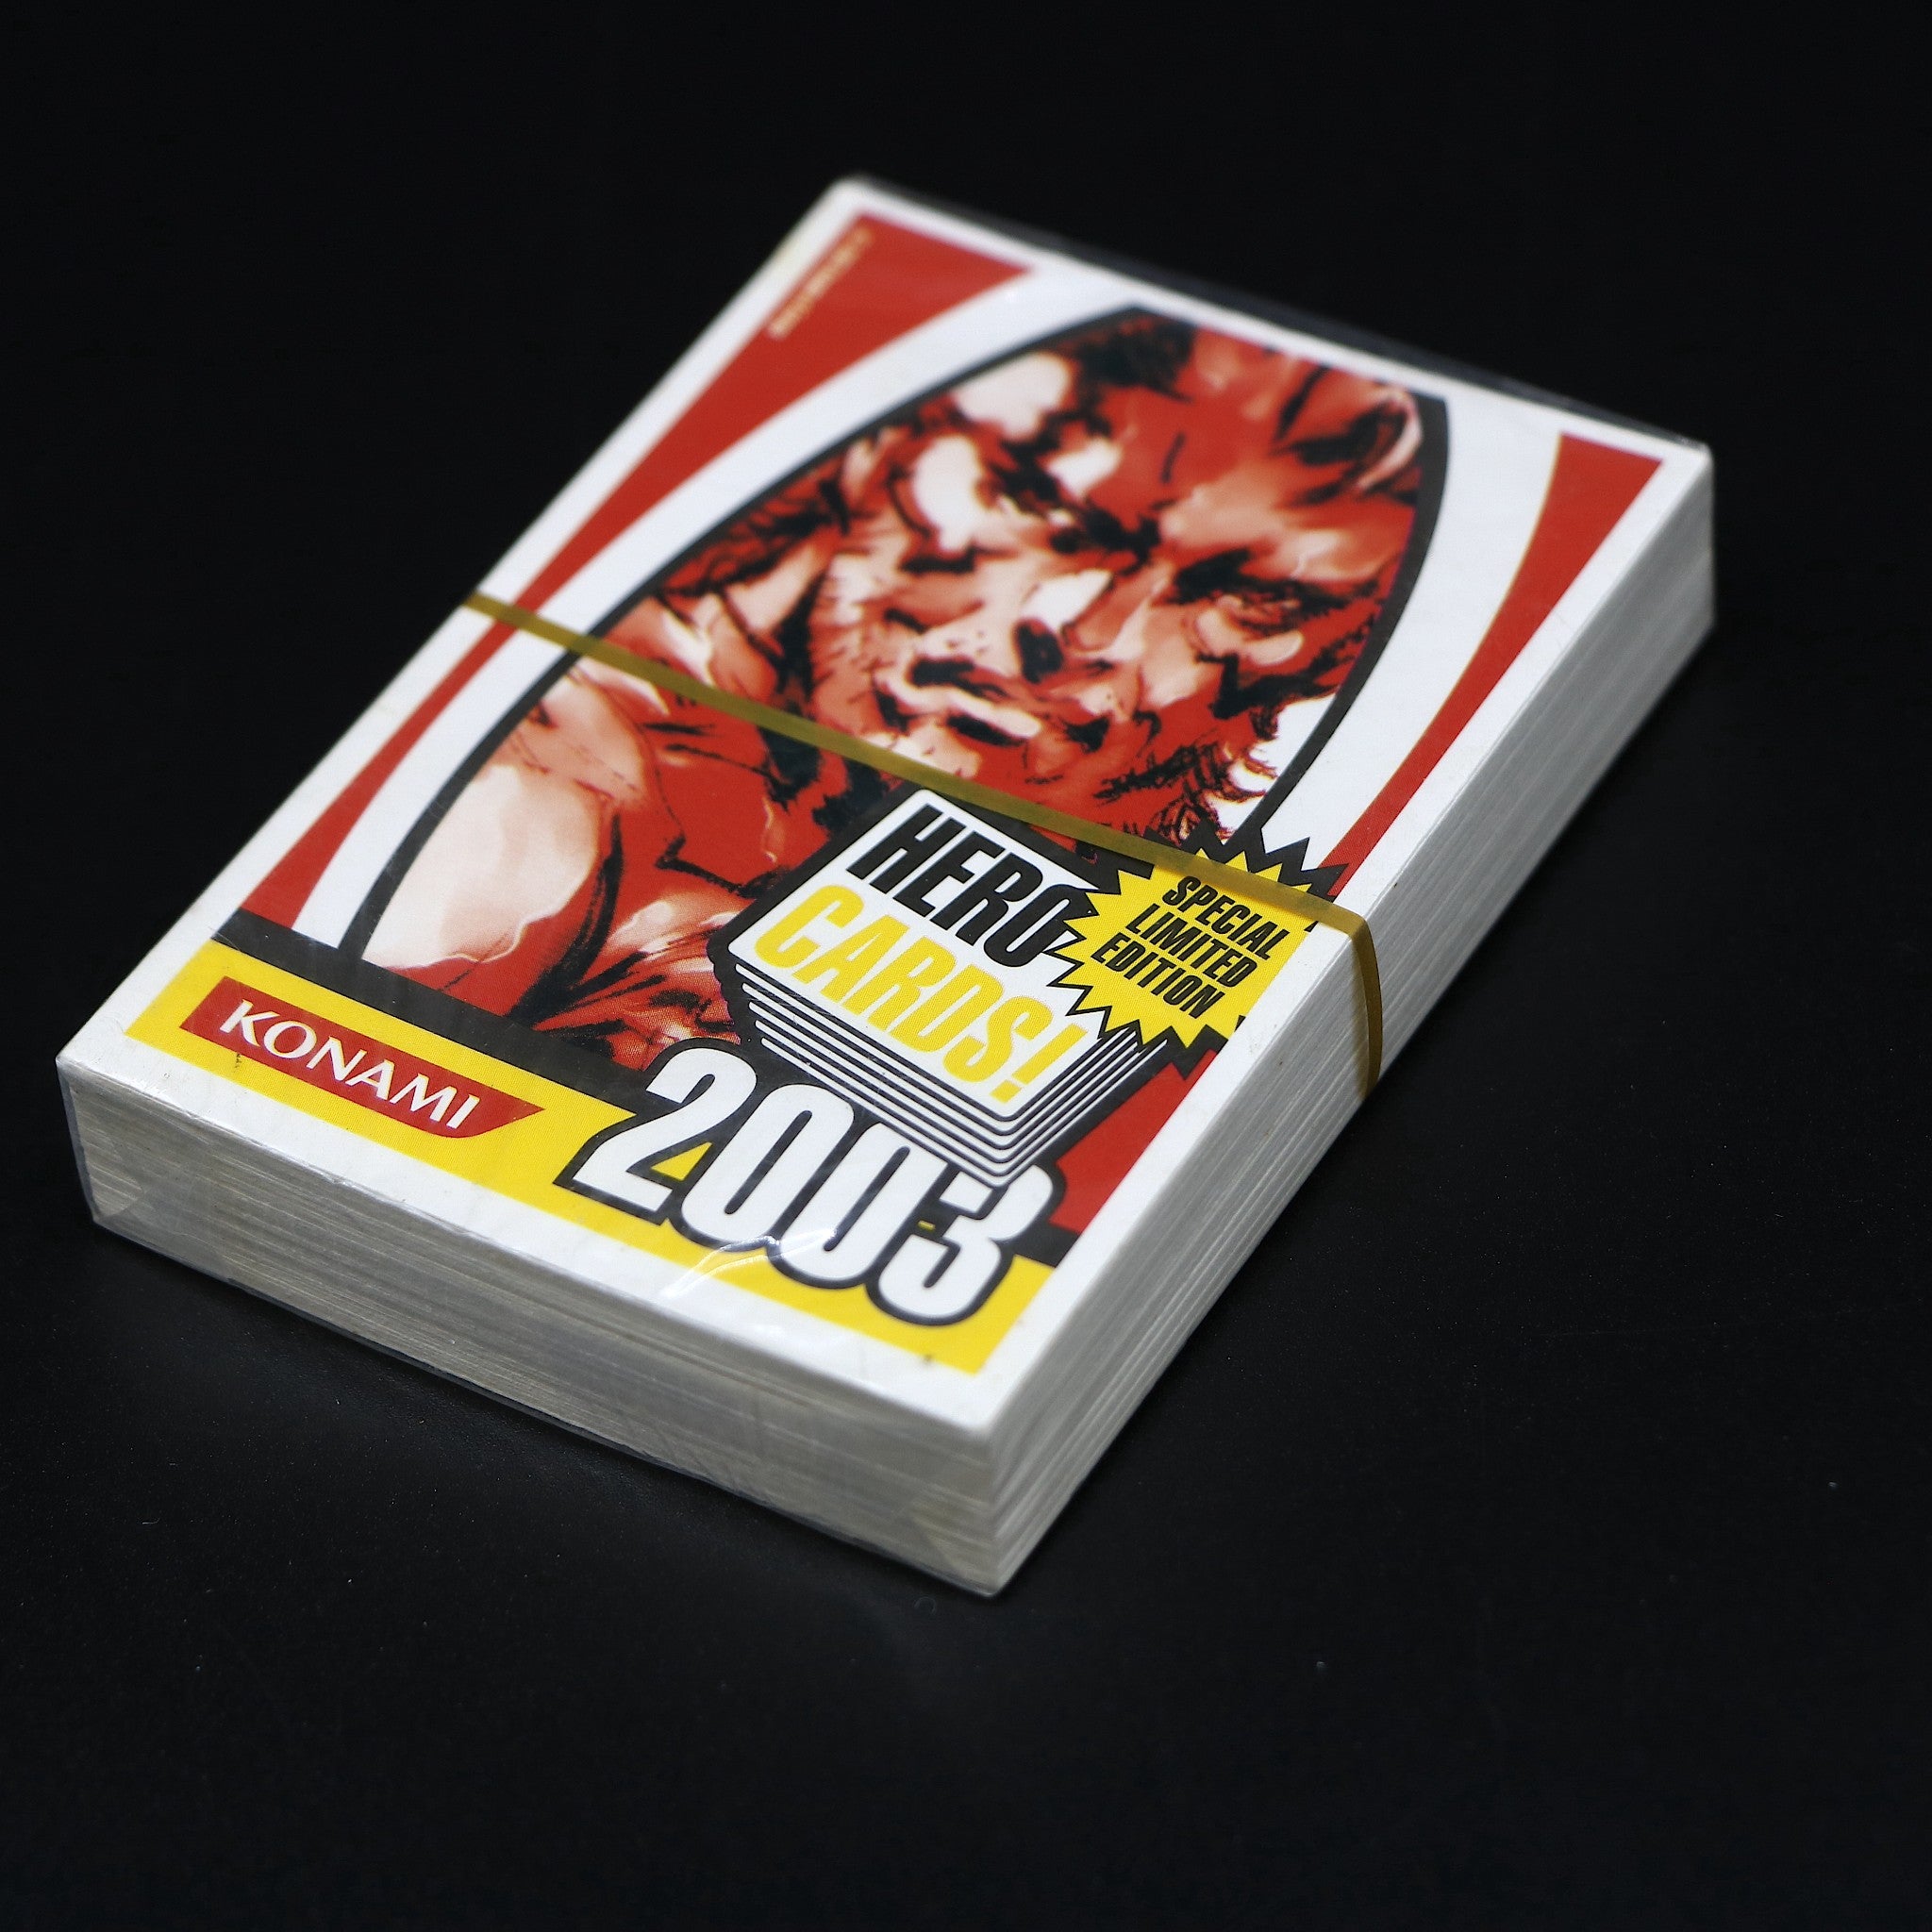 Konami Hero Cards 2003 Metal Gear Solid | Special Limited Edition Playing Cards